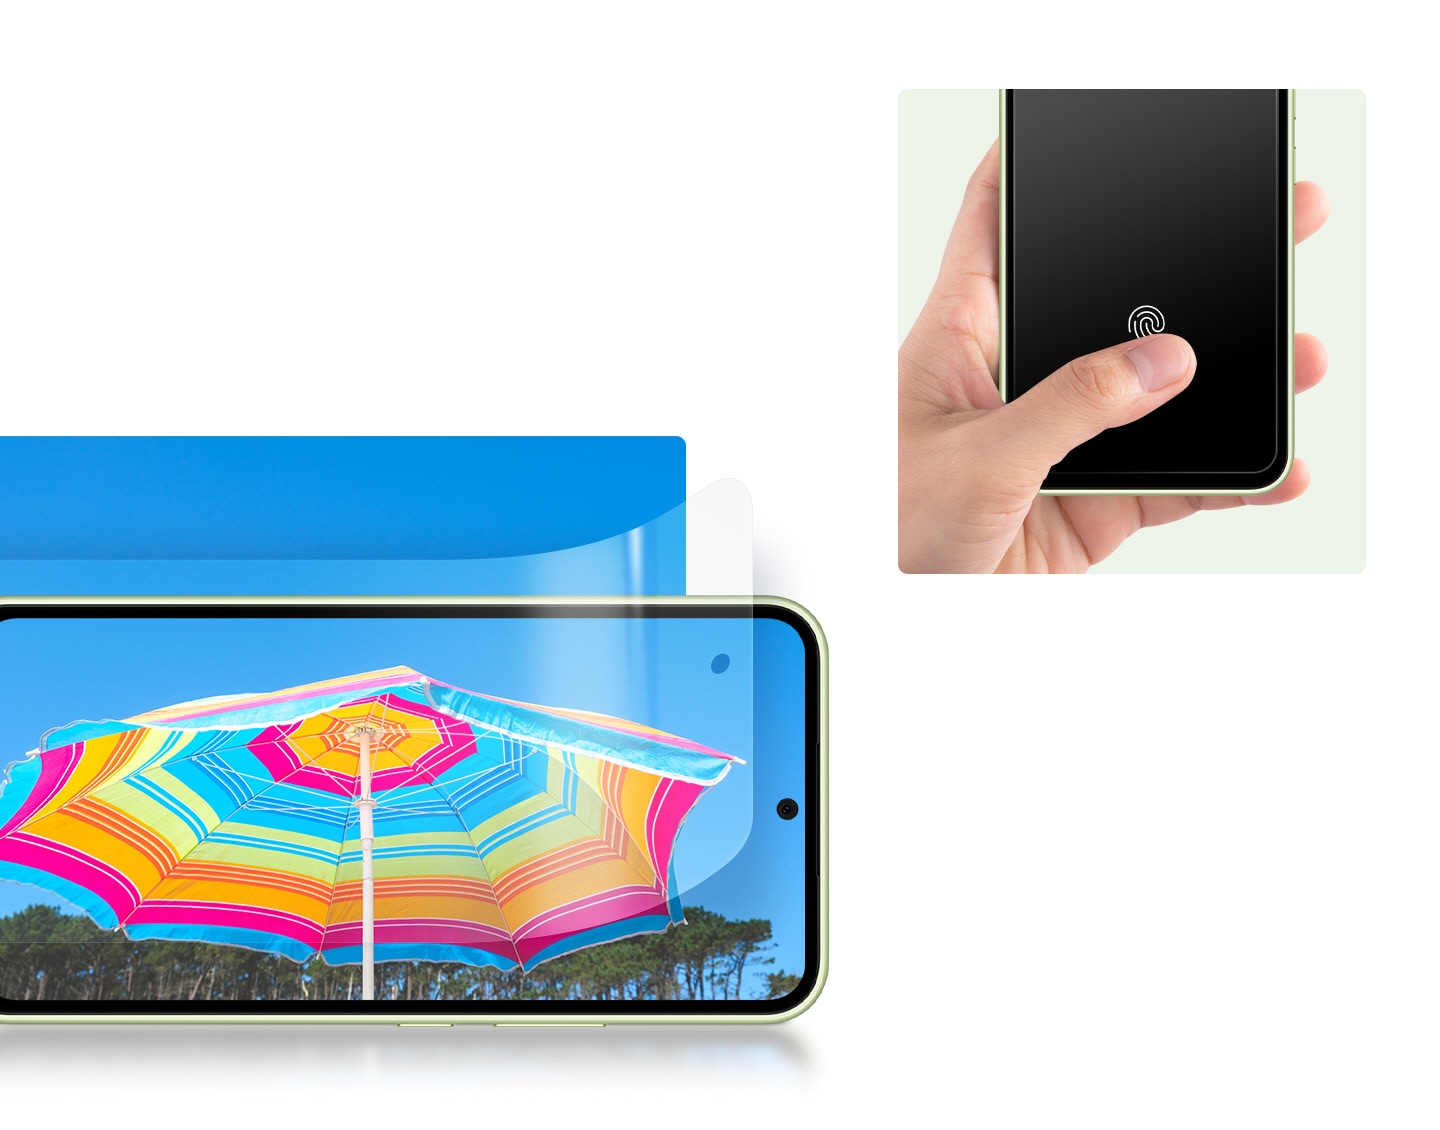 A Galaxy device showing a colorful sunshade under a blue sky on-screen has a Screen Protector film being installed. A hand holding a Galaxy device with a Screen Protector film installed is touching the fingerprint sensor area with a thumb.